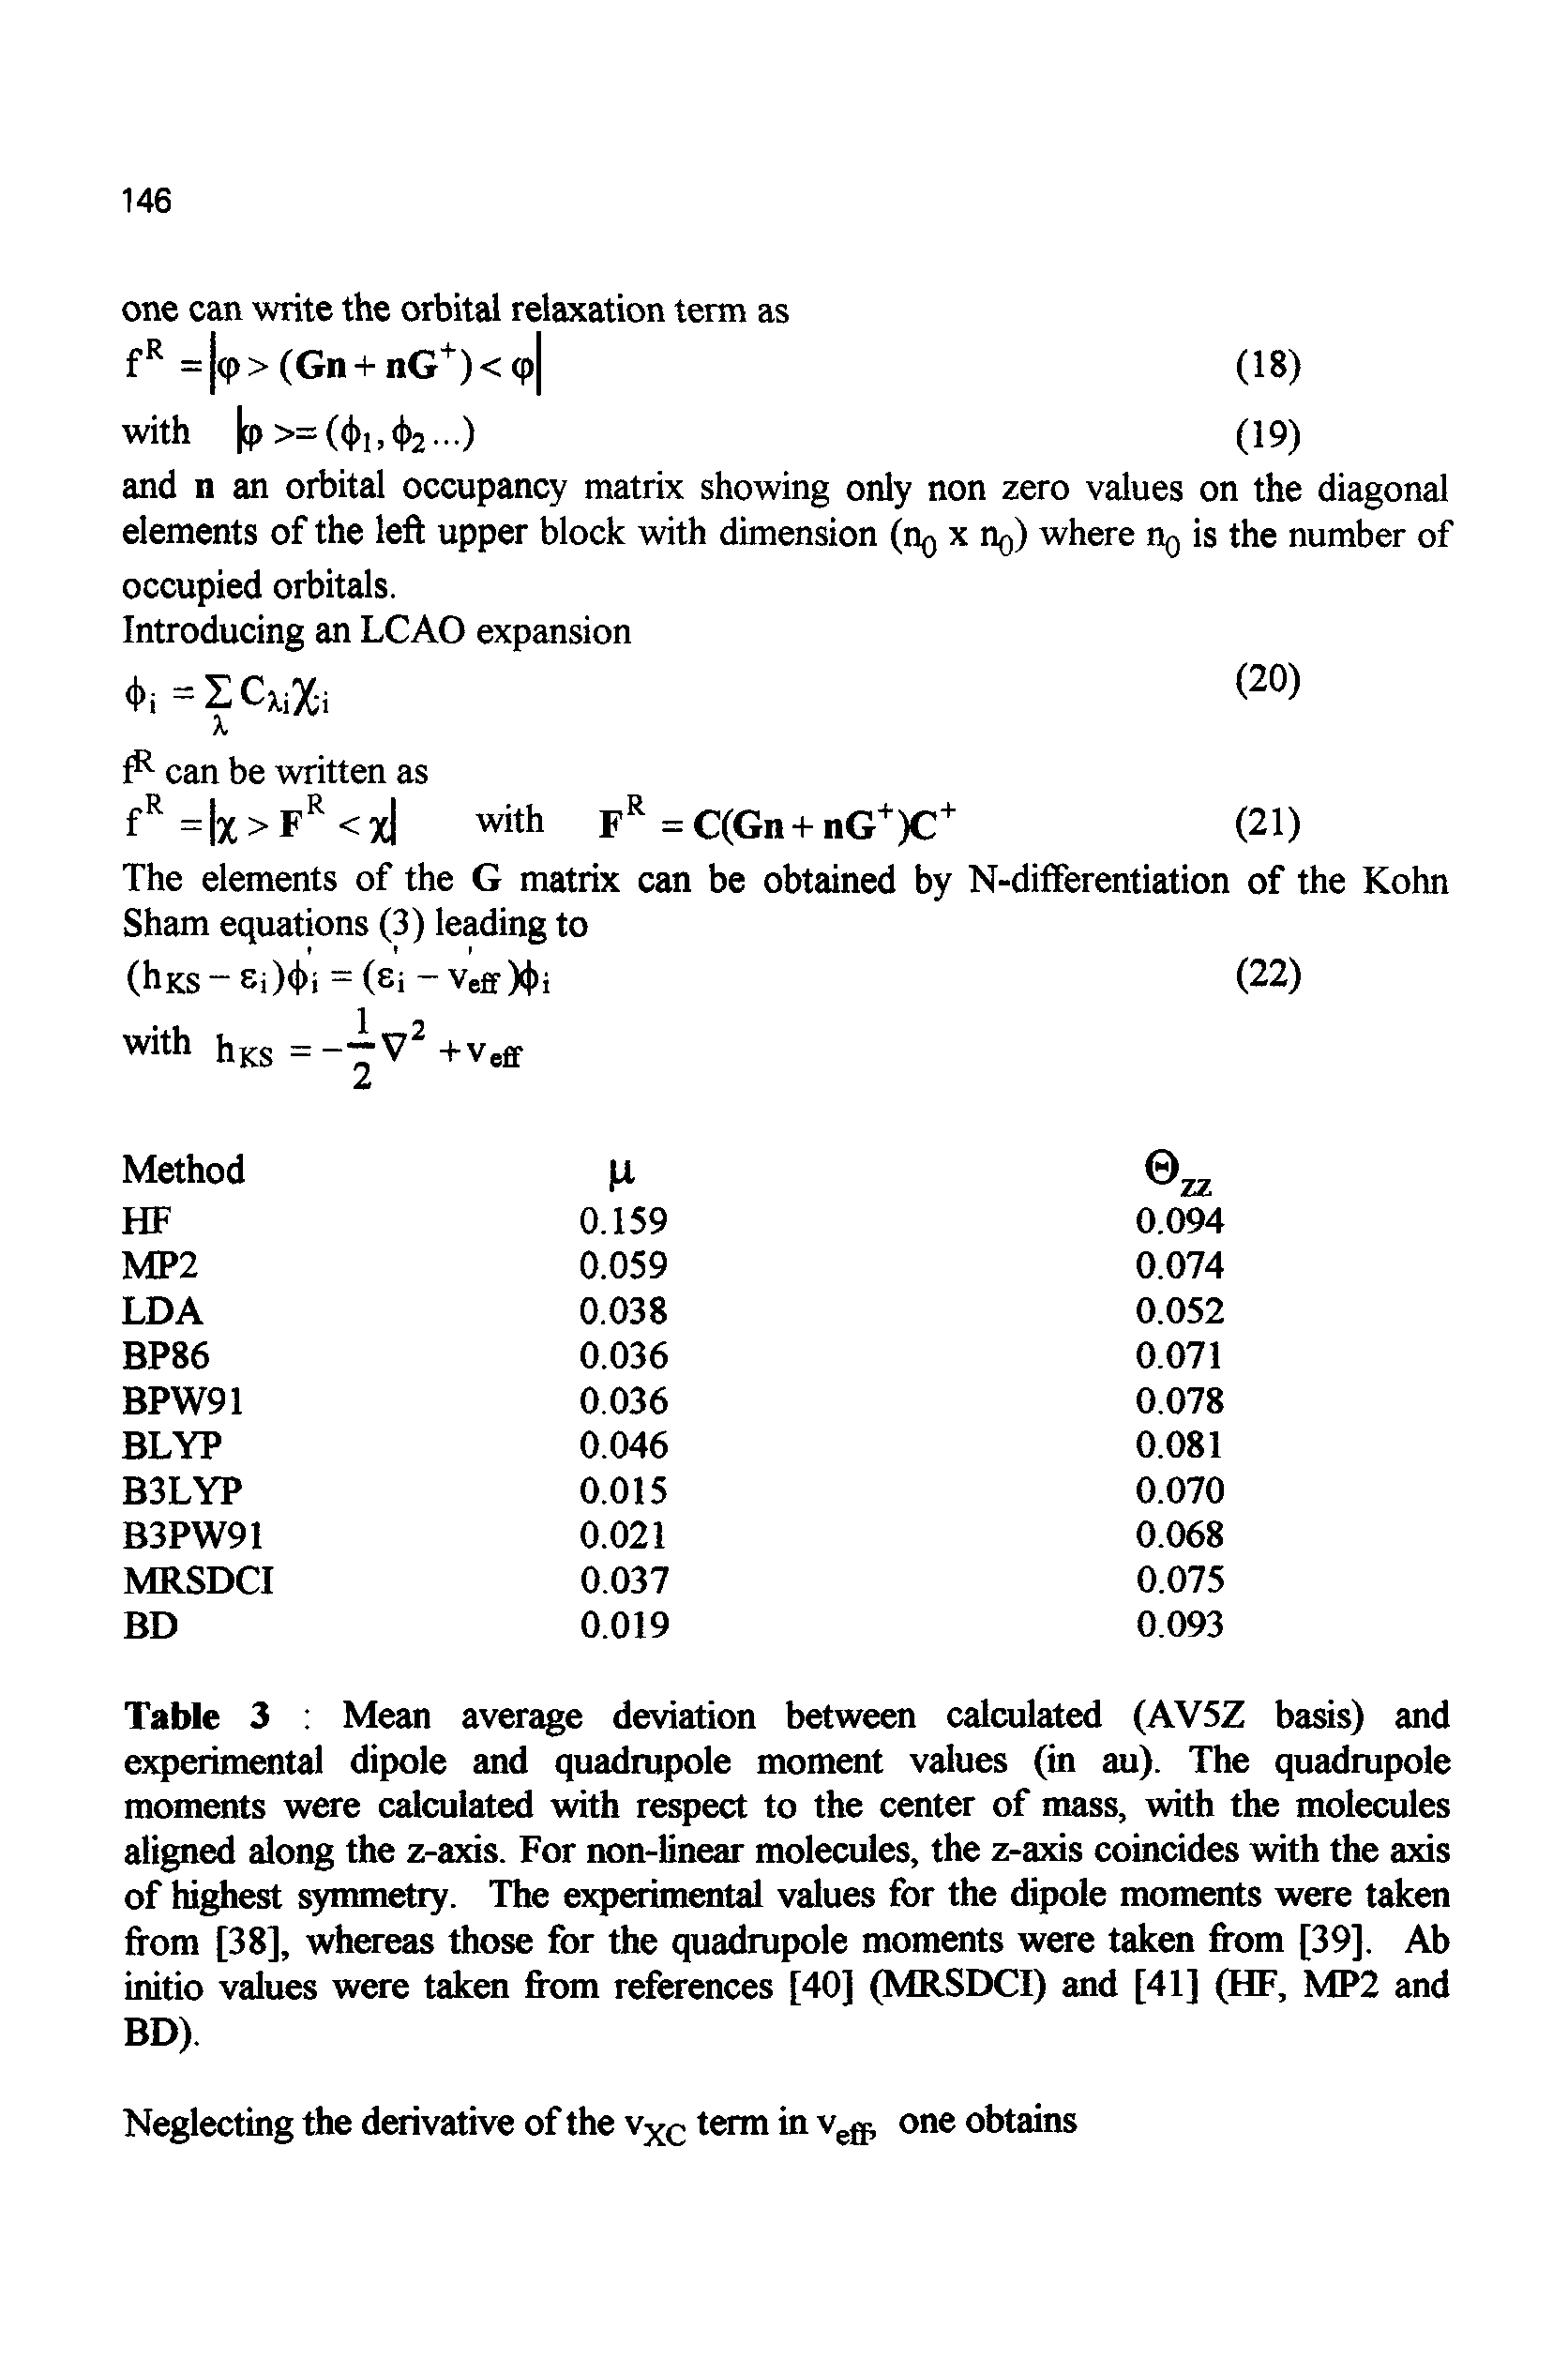 Table 3 Mean average deviation between calculated (AV5Z basis) and experimental dipole and quadrupole moment values (in au). The quadrupole moments were calculated with respect to the center of mass, with the molecules aligned along the z-axis. For non-linear molecules, the z-axis coincides with the axis of highest symmetry. The experimental values for the dipole moments were taken from [38], whereas those for the quadrupole moments were taken from [39]. Ab initio values were taken from references [40] (MRSDCI) and [41] (HF, MP2 and BD).